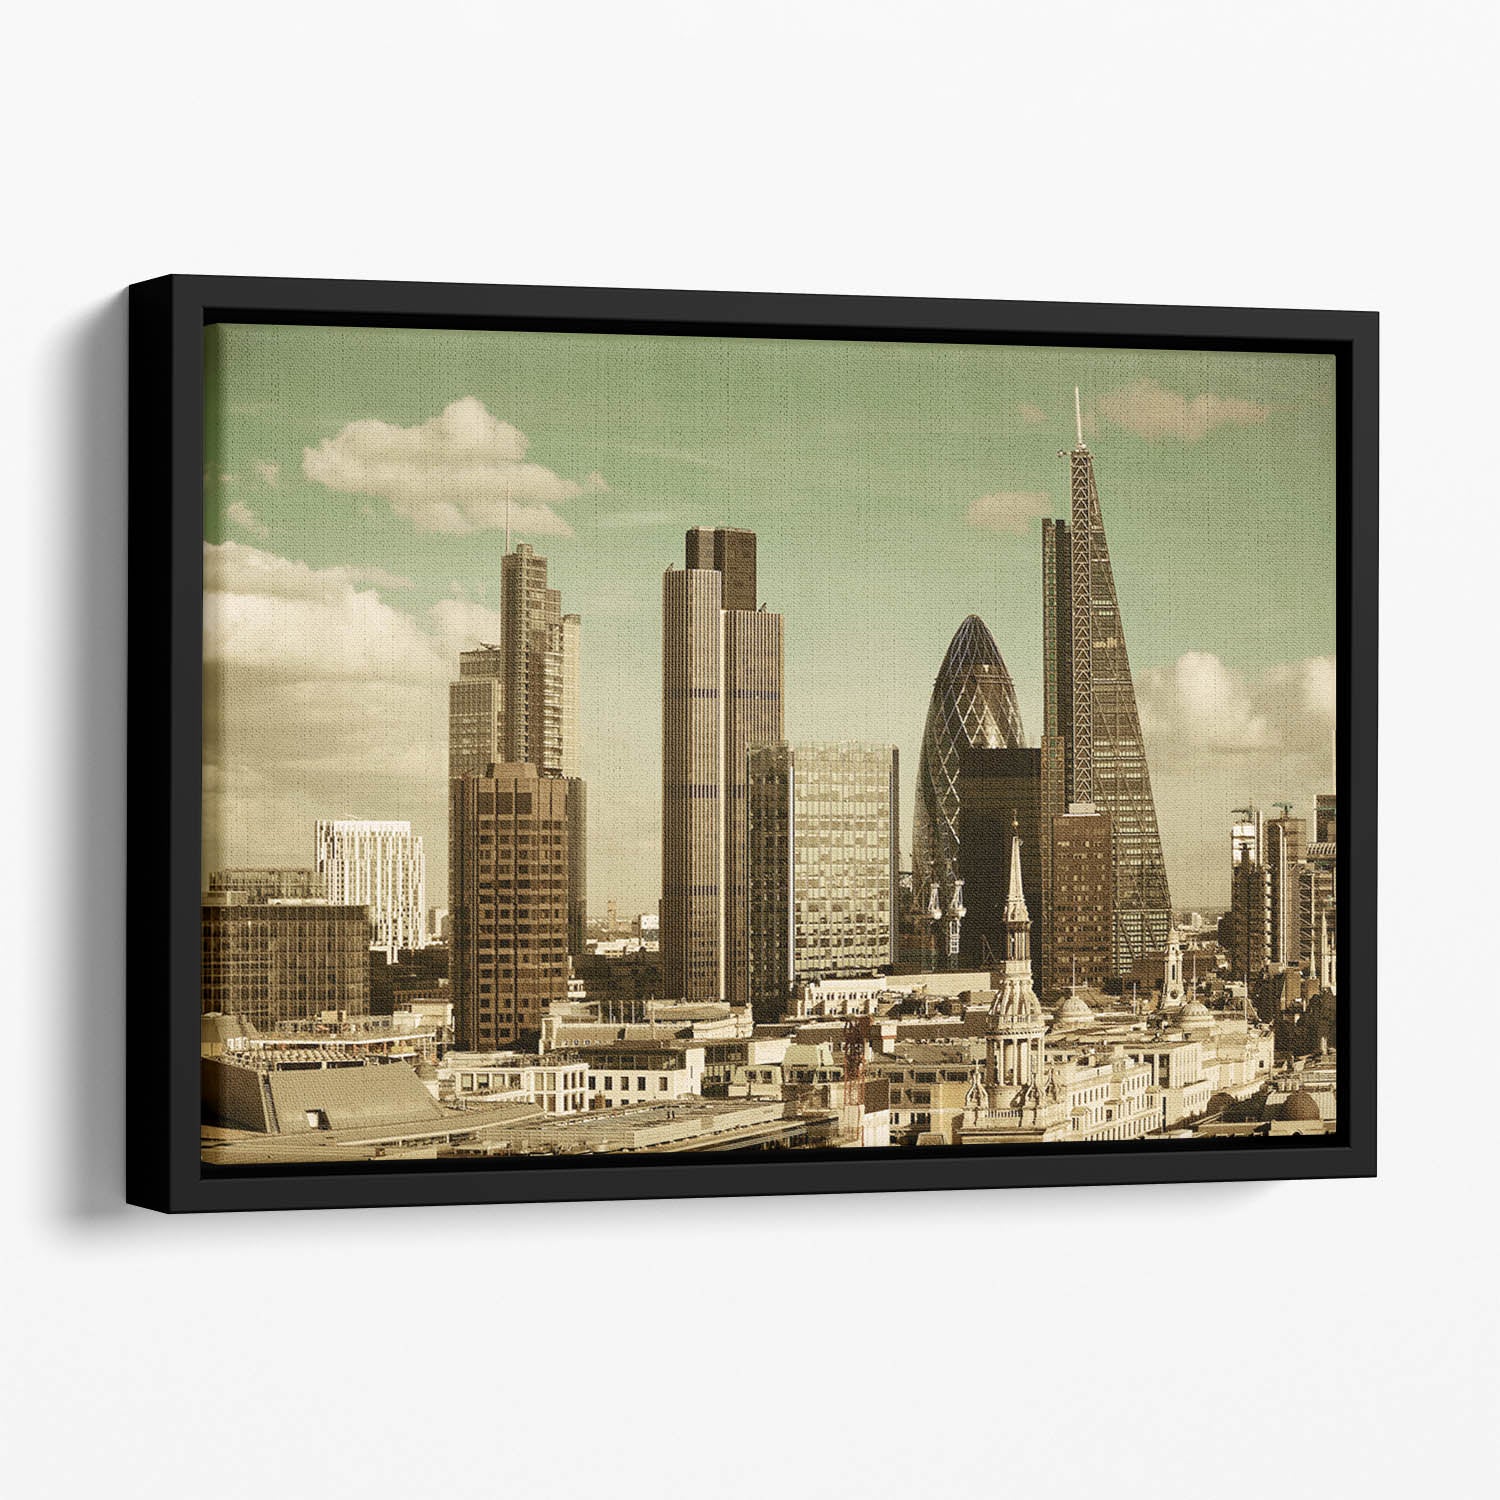 London city rooftop view with urban architectures Floating Framed Canvas